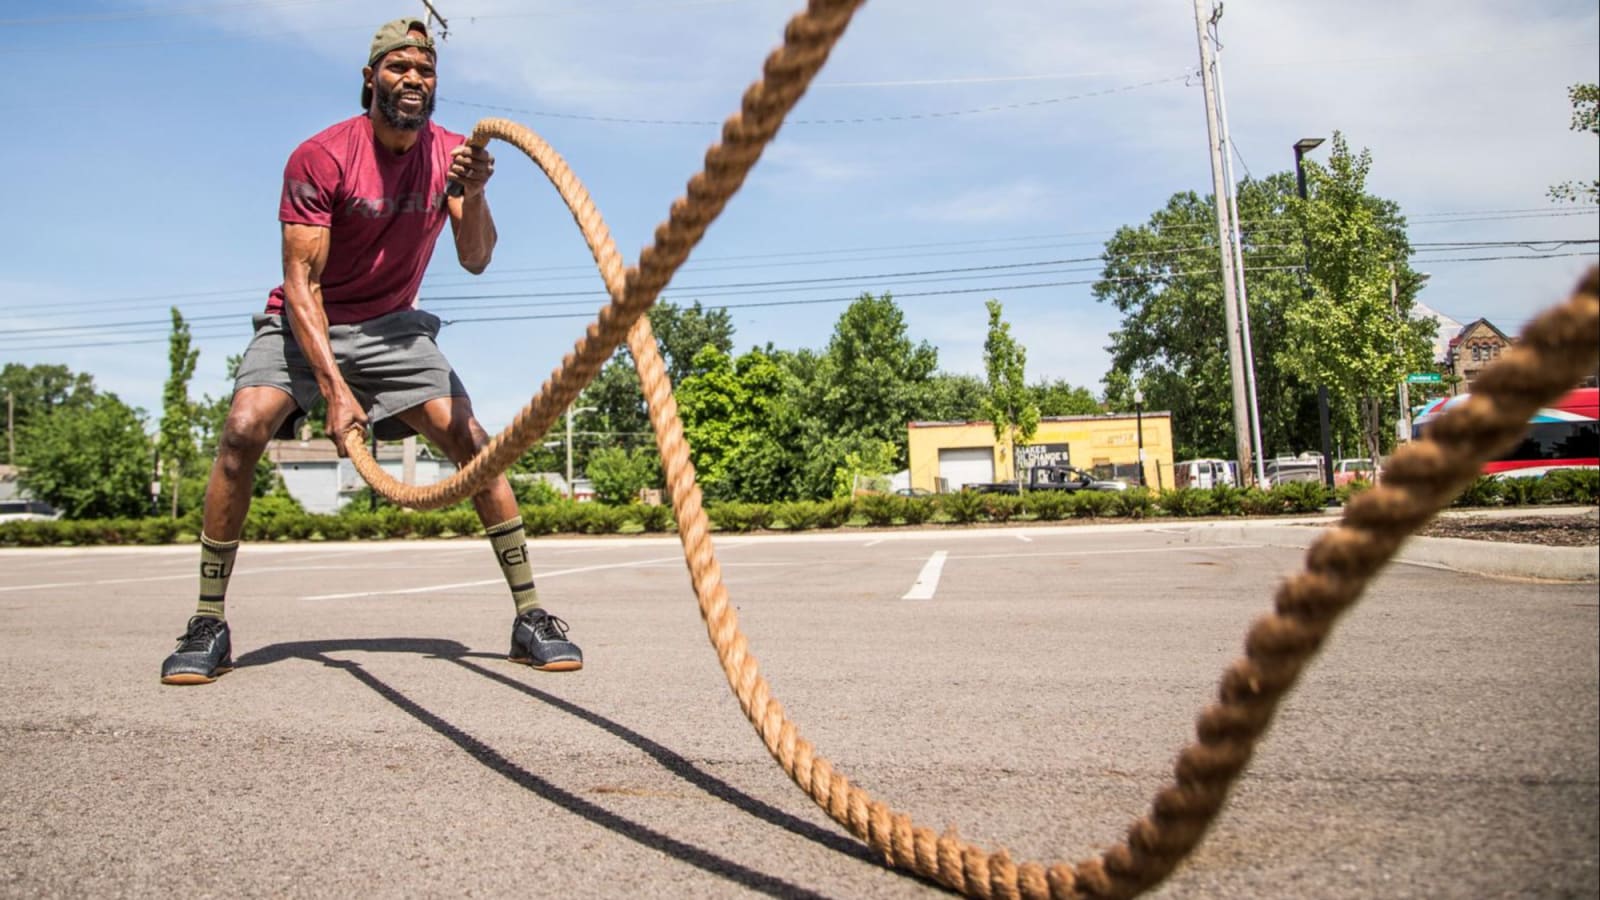 Rogue Conditioning Rope- 50' Power rope